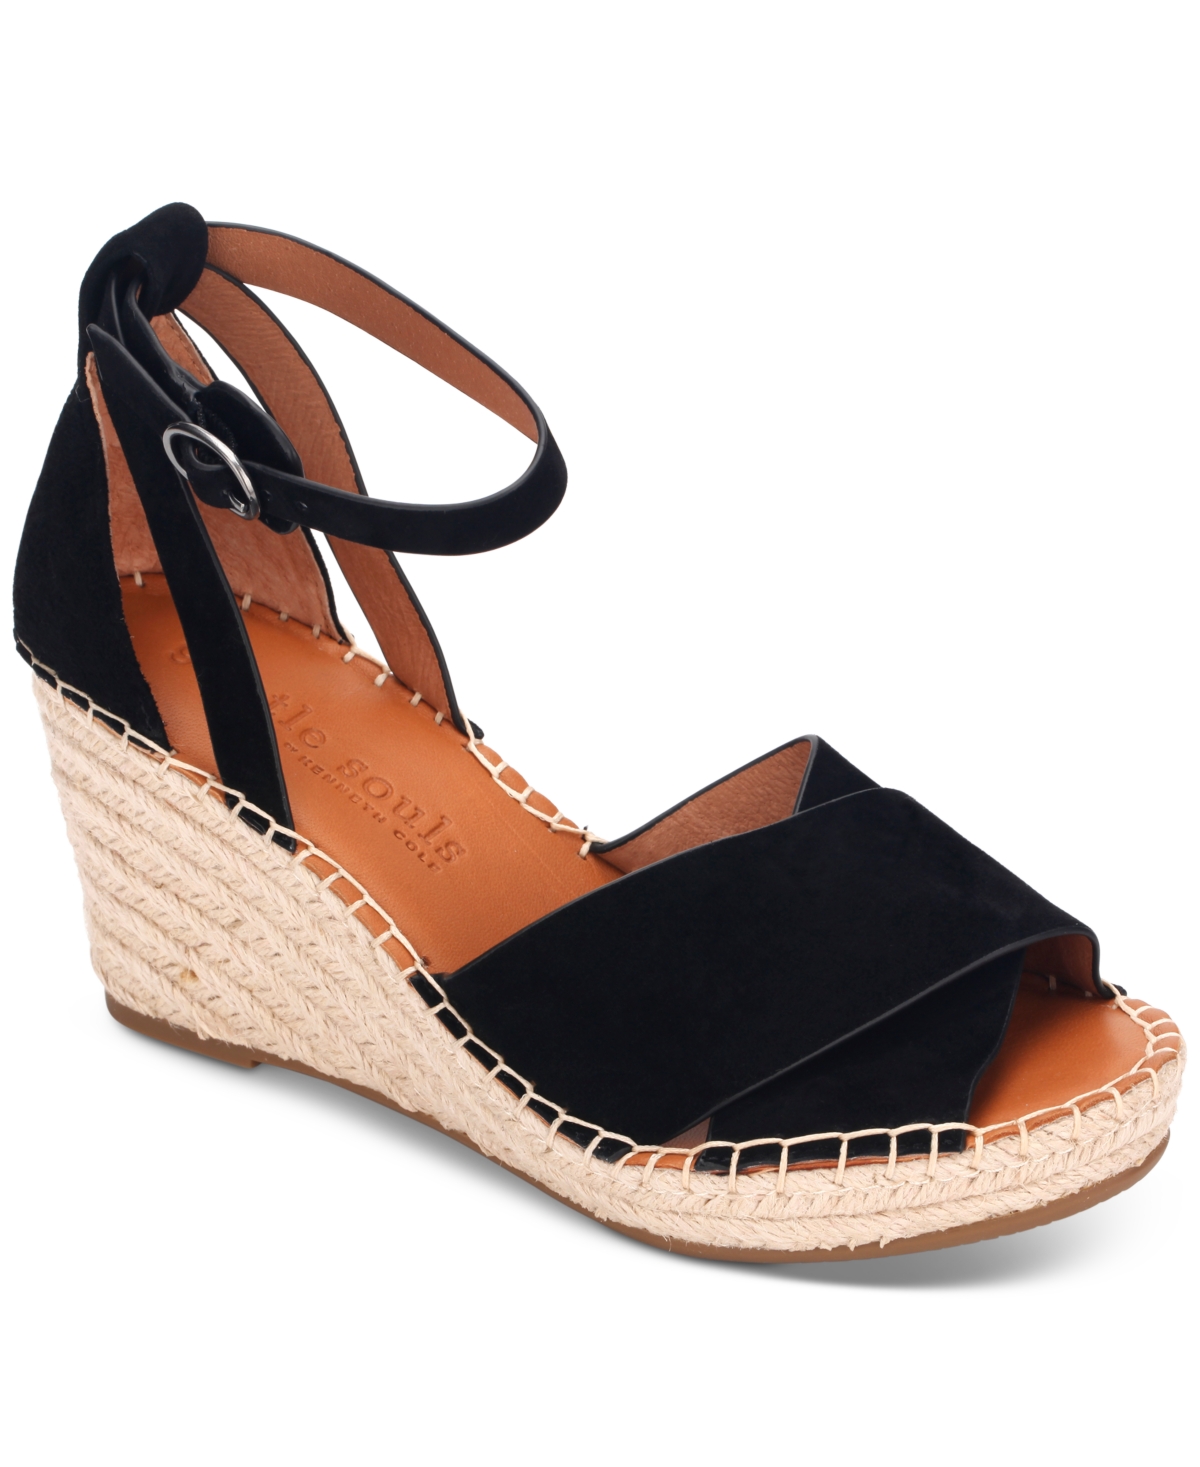 Women's Charli Ankle-Strap Espadrille Wedge Sandals - Ice